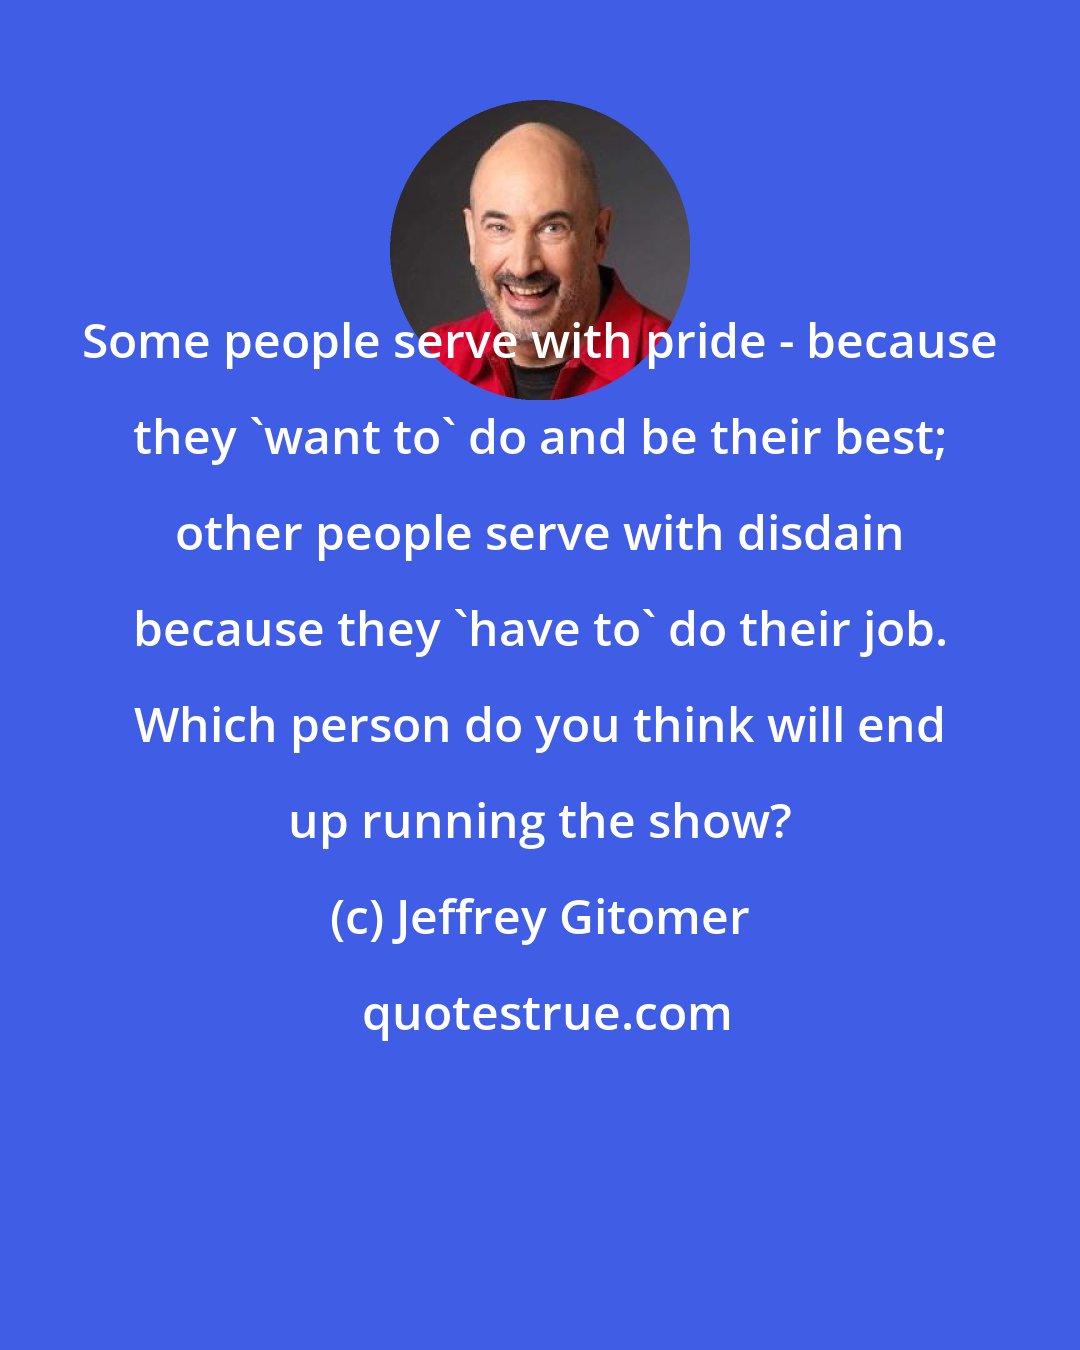 Jeffrey Gitomer: Some people serve with pride - because they 'want to' do and be their best; other people serve with disdain because they 'have to' do their job. Which person do you think will end up running the show?